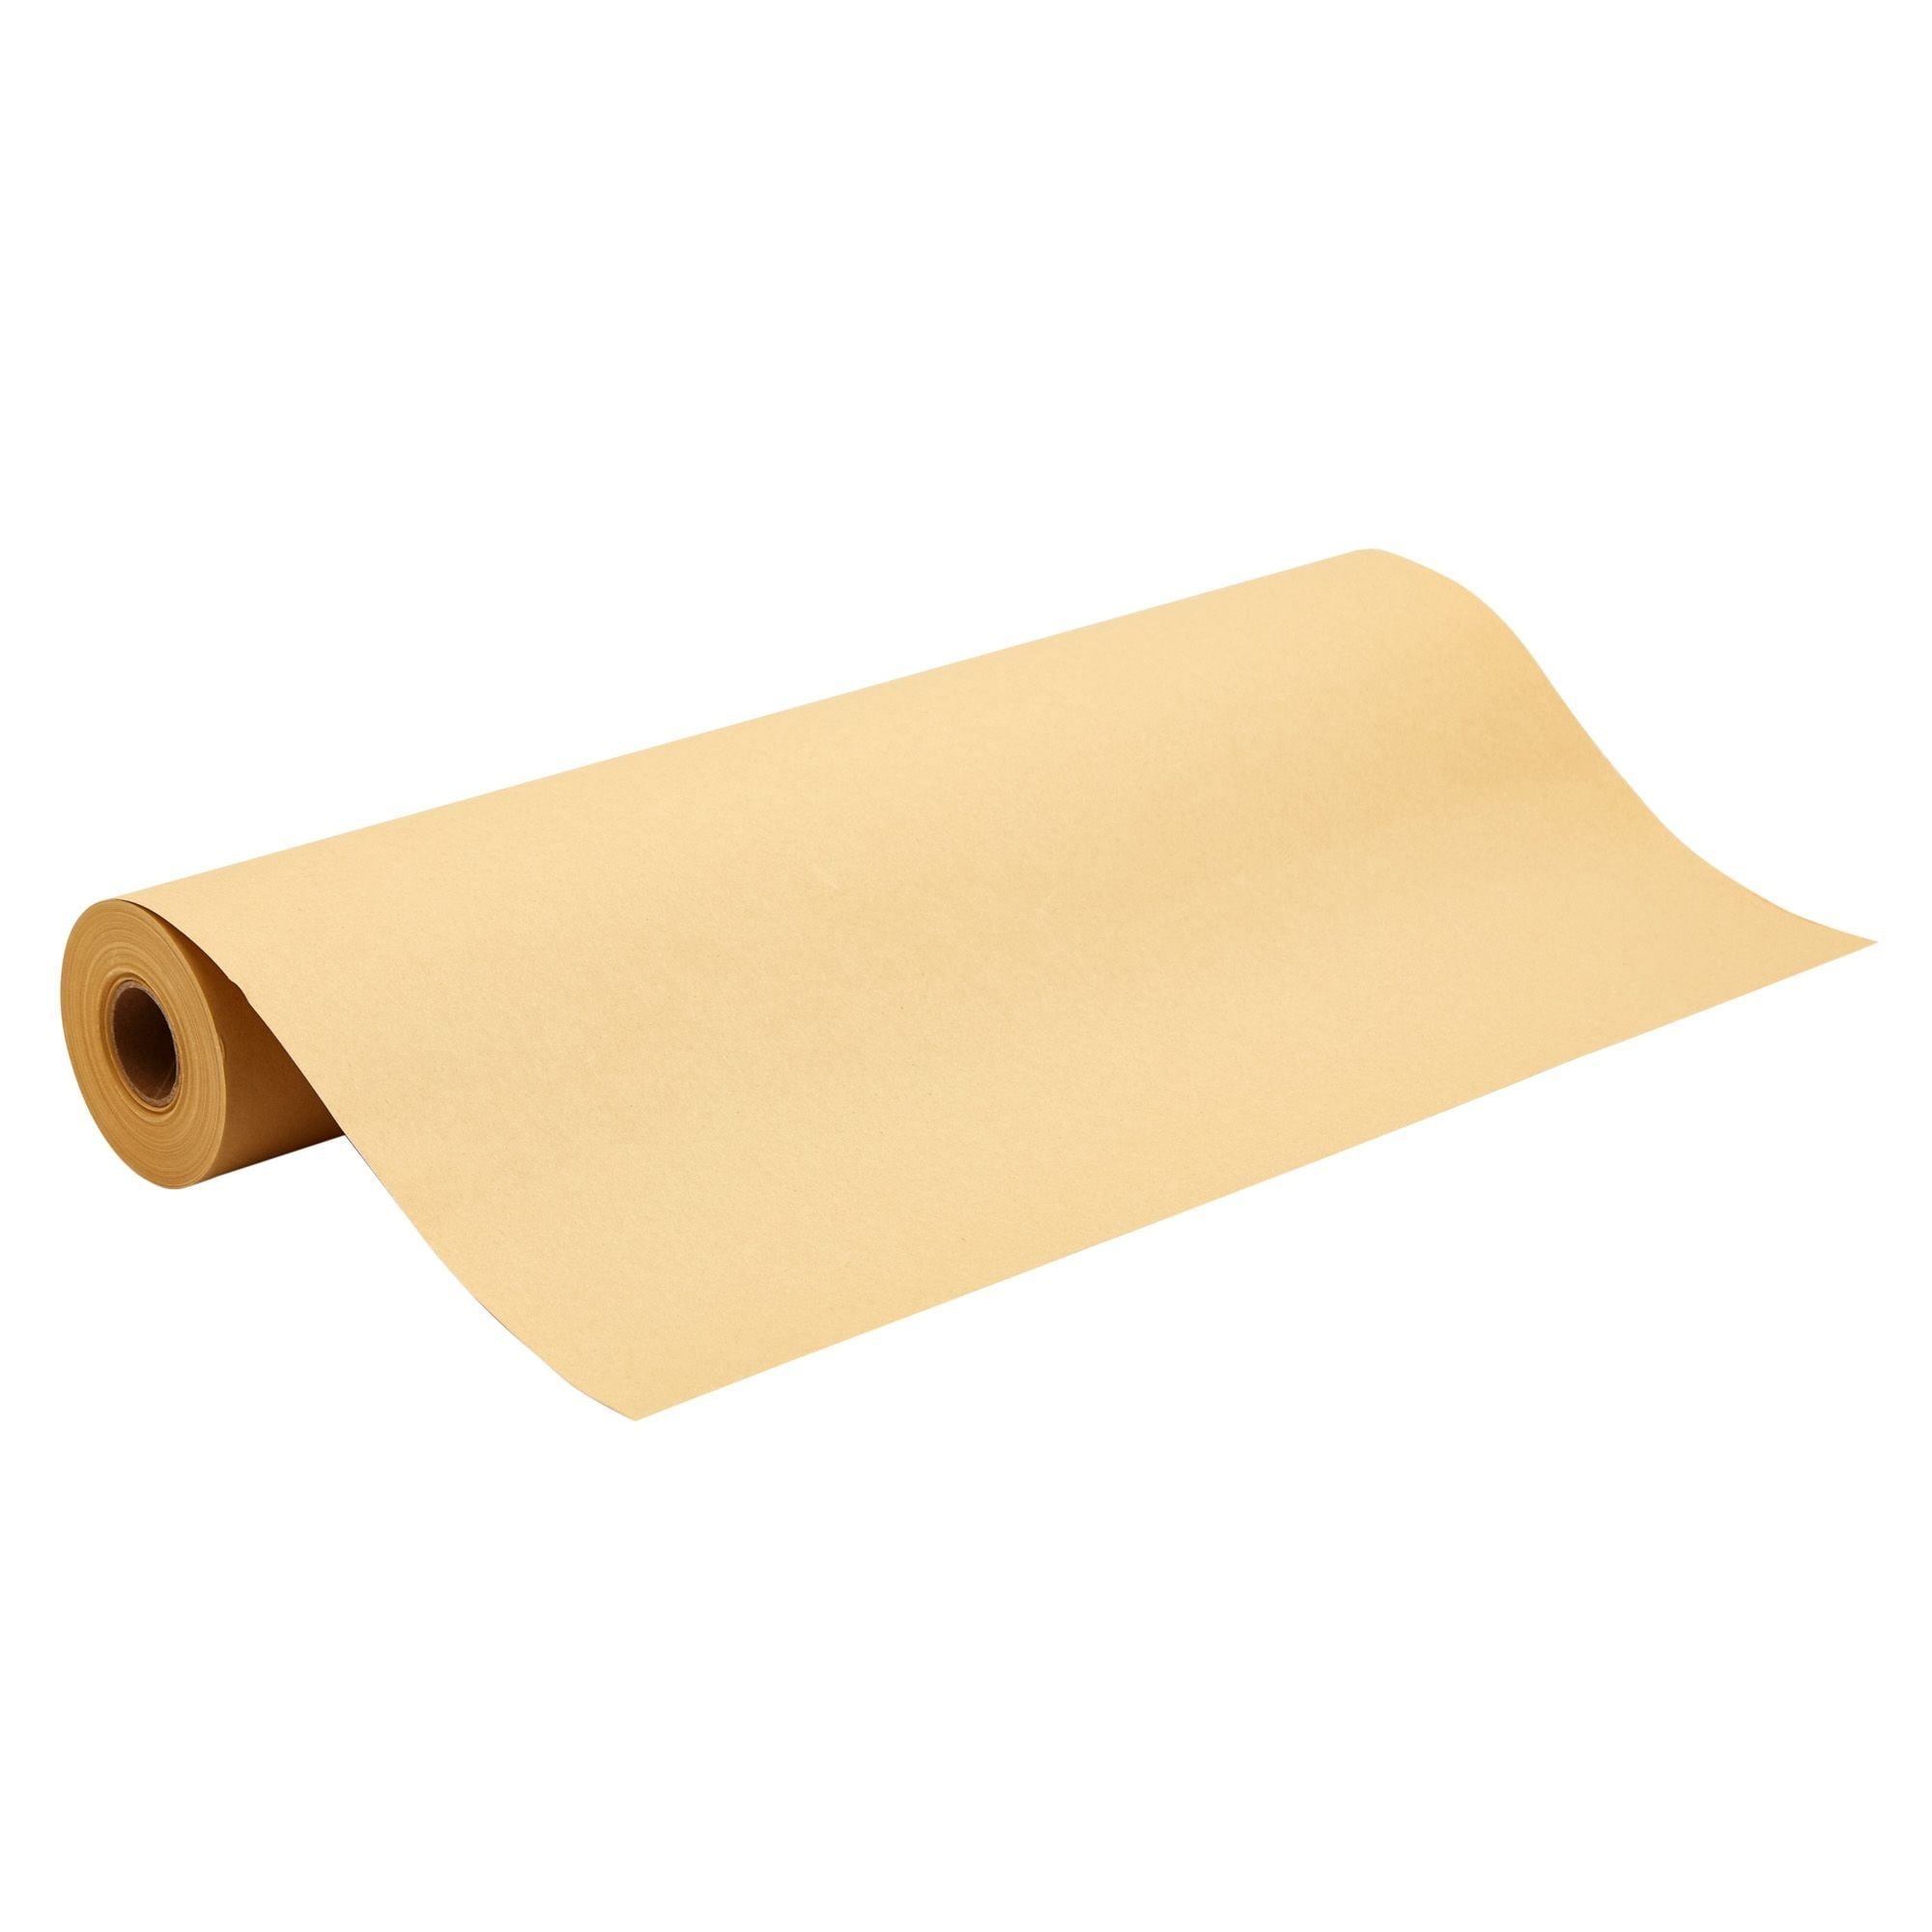  PerkHomy Brown Kraft Paper Roll 17.5 x 1,200 (100') for Gift  Wrapping Bulletin Board Bouquet Flower Kids Wall Art Craft Packing Moving  Shipping Parcel Postal Floor Covering Table Runner 65GSM 45LB